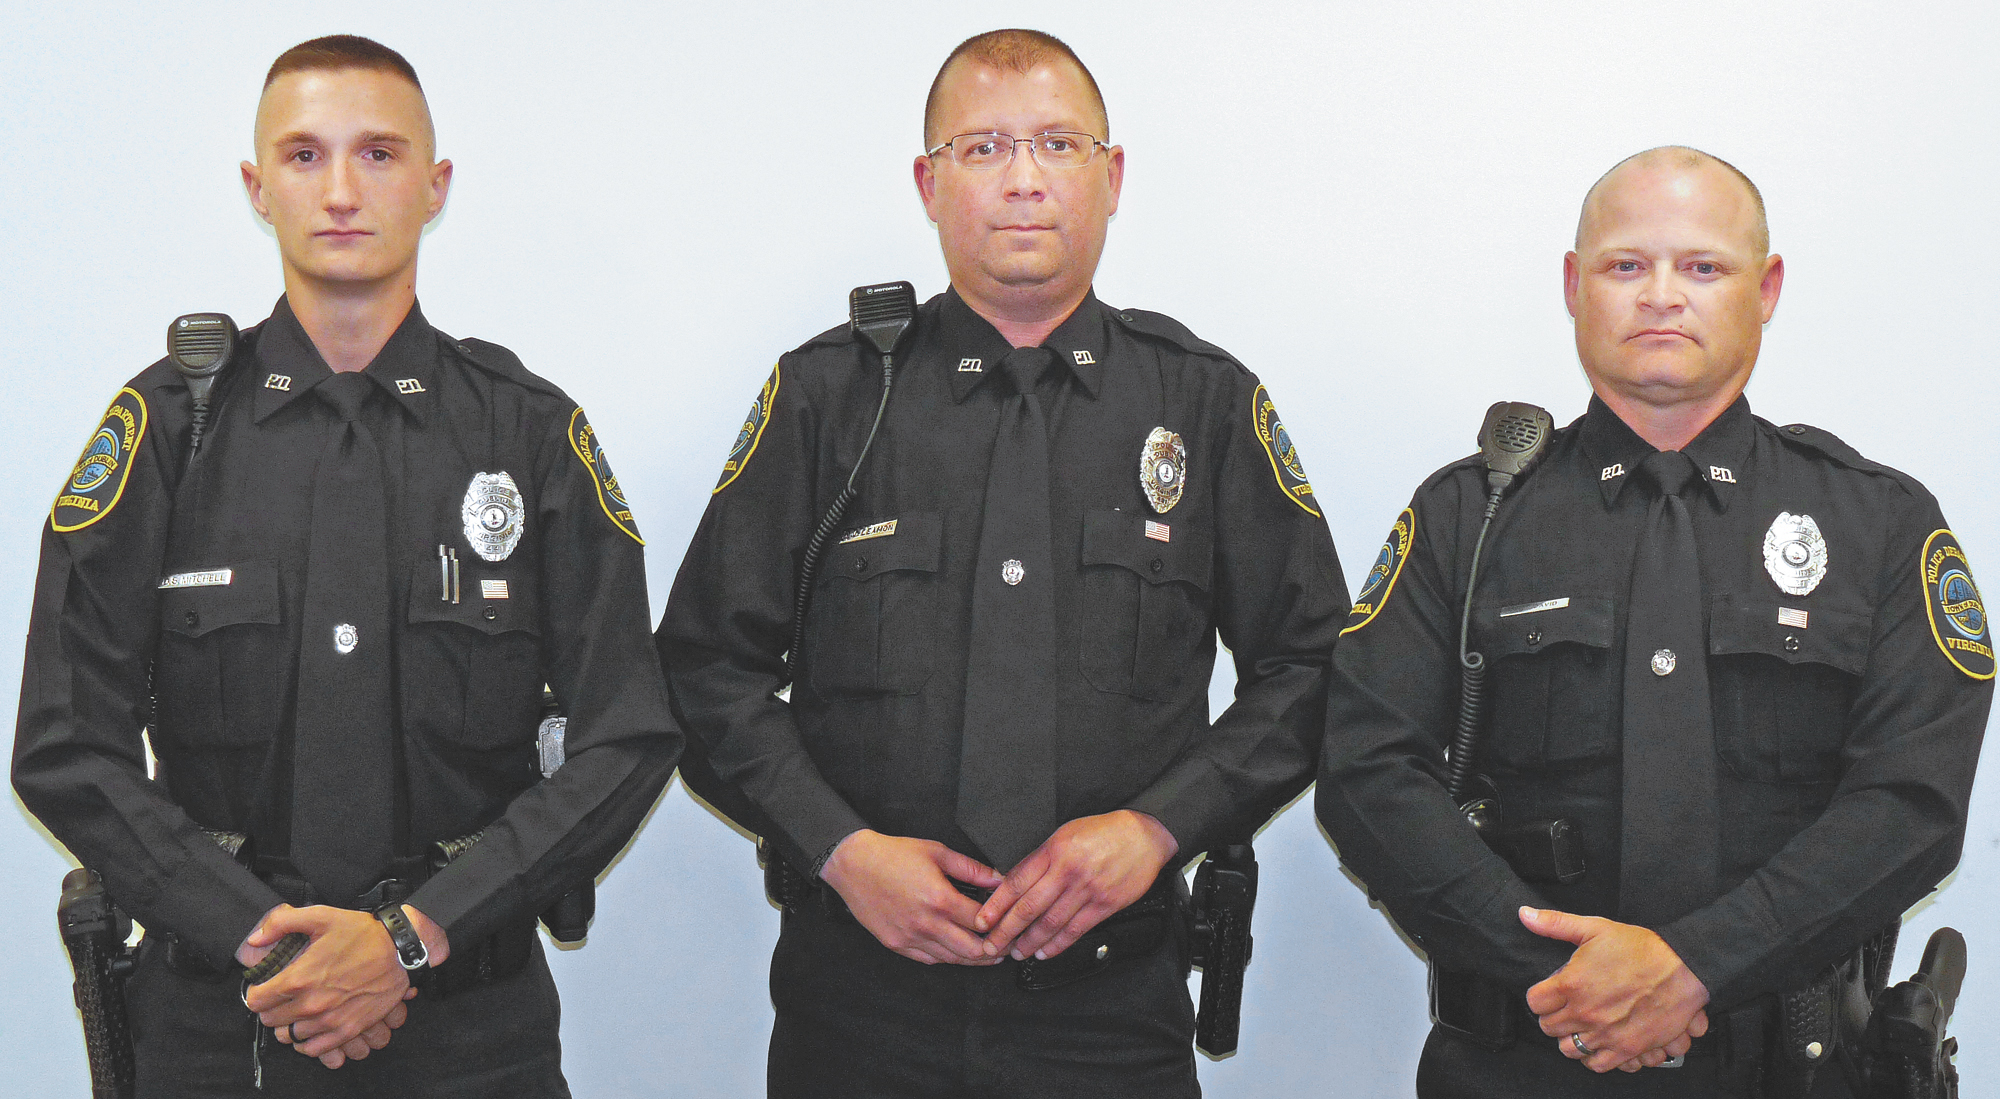 Dublin hires new police officers | The Southwest Times